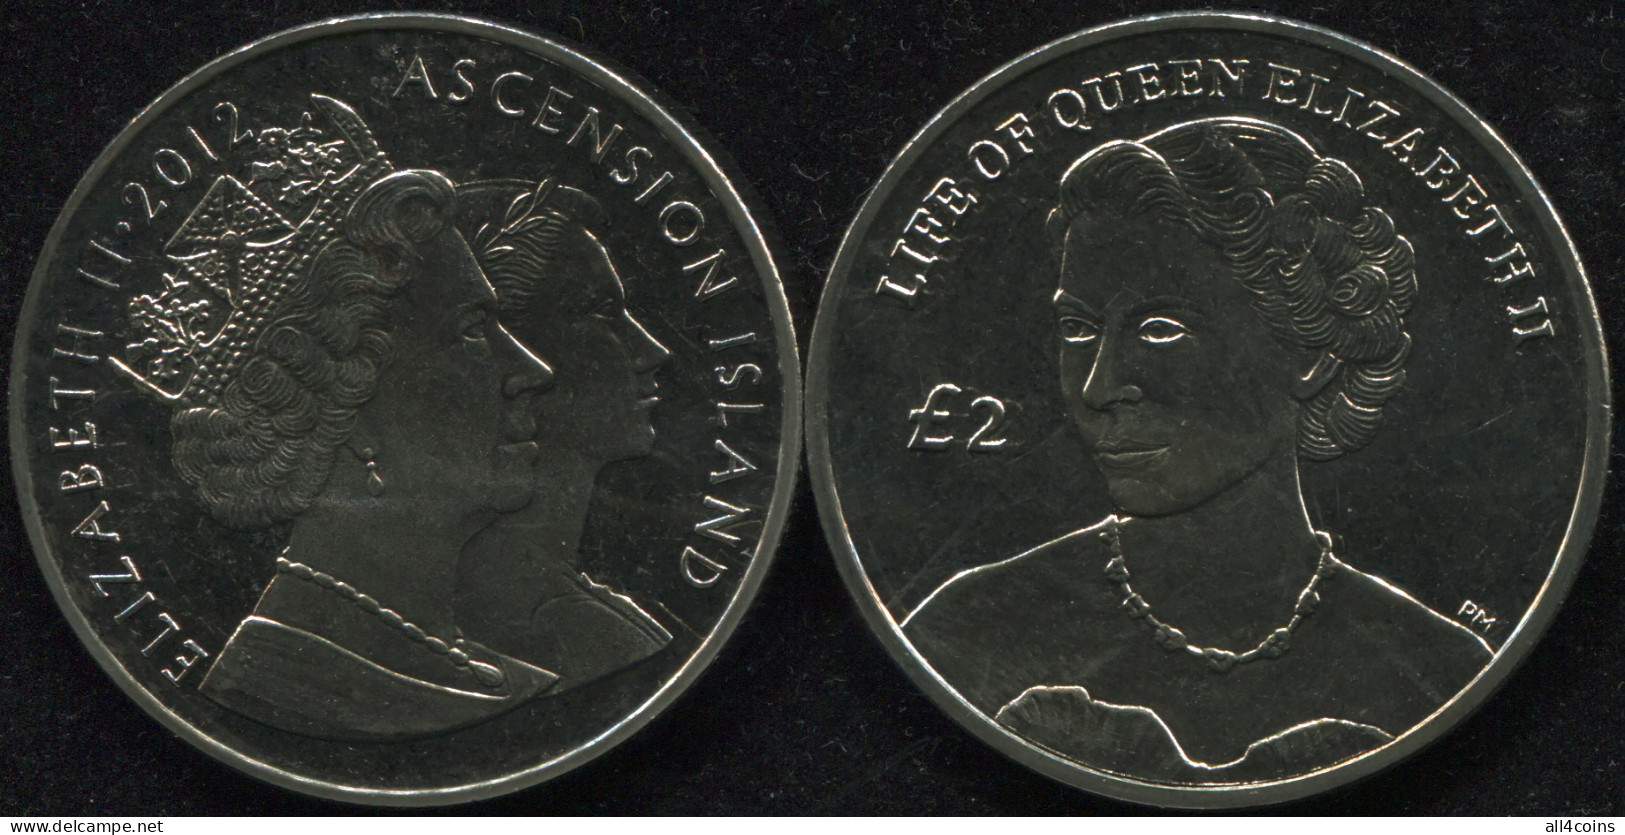 Ascension Island. 2 Pounds. 2012 (Coin KM#21. Unc) Life Of Queen Elizabeth II - Ascension